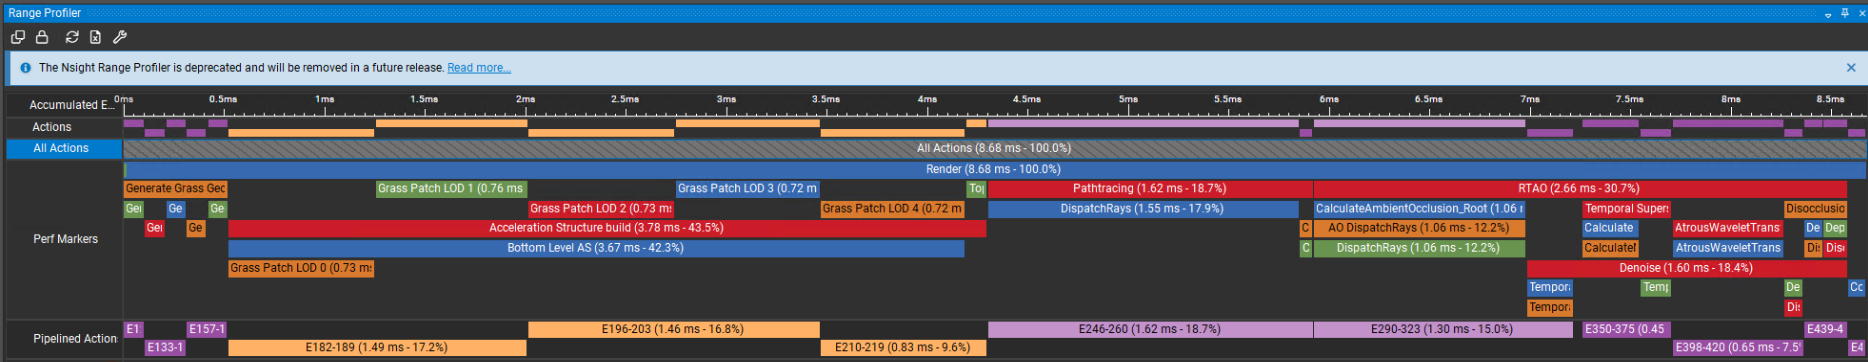 The Range Profiler’s selector contains a graphical display of perf markers over time, with their nesting structure.